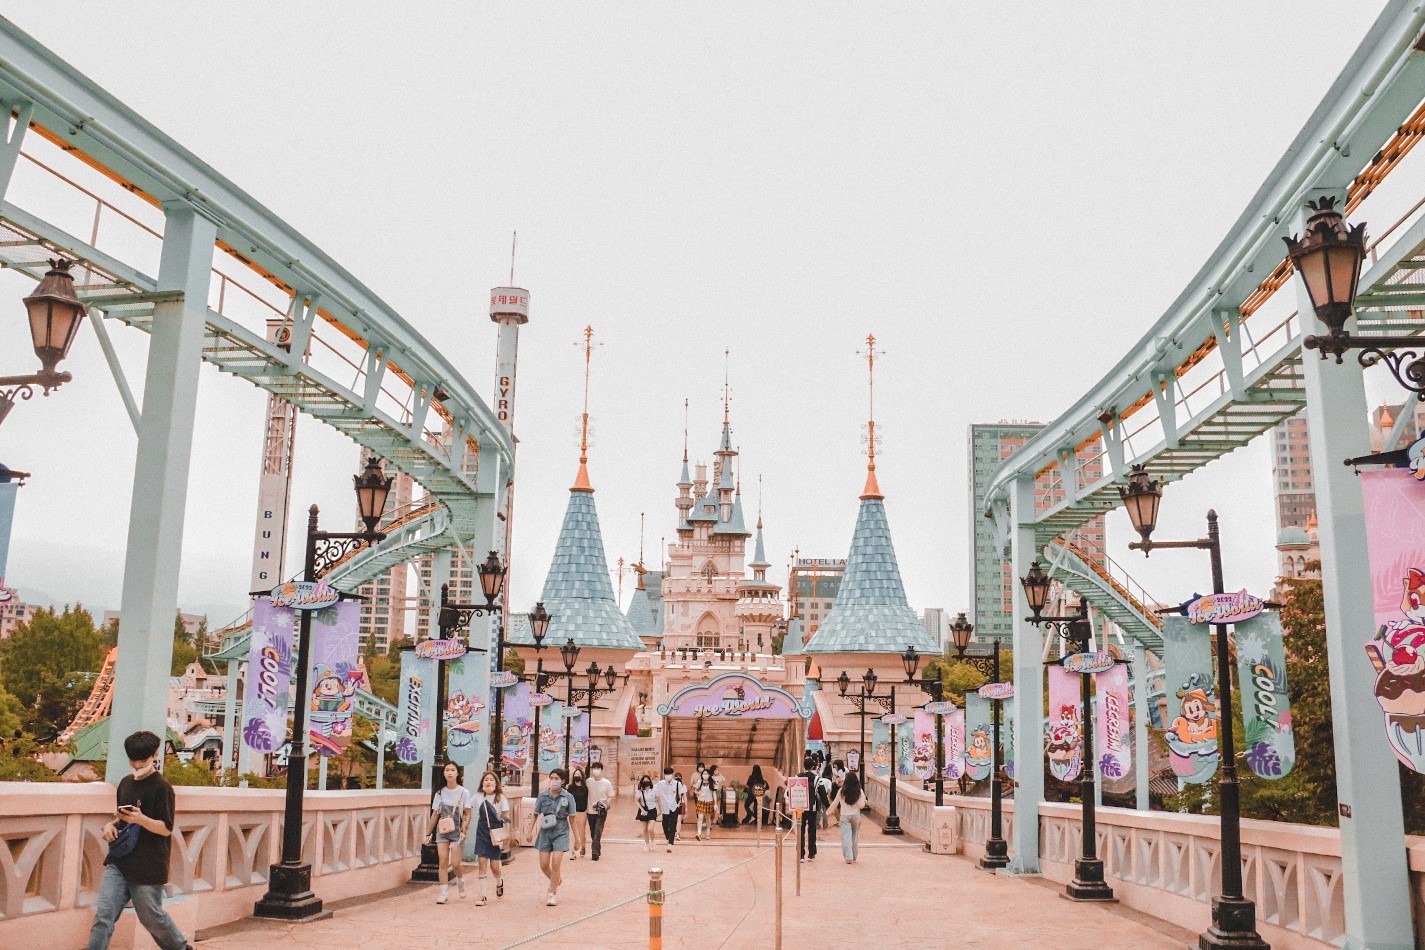 A Day Trip to Lotte World